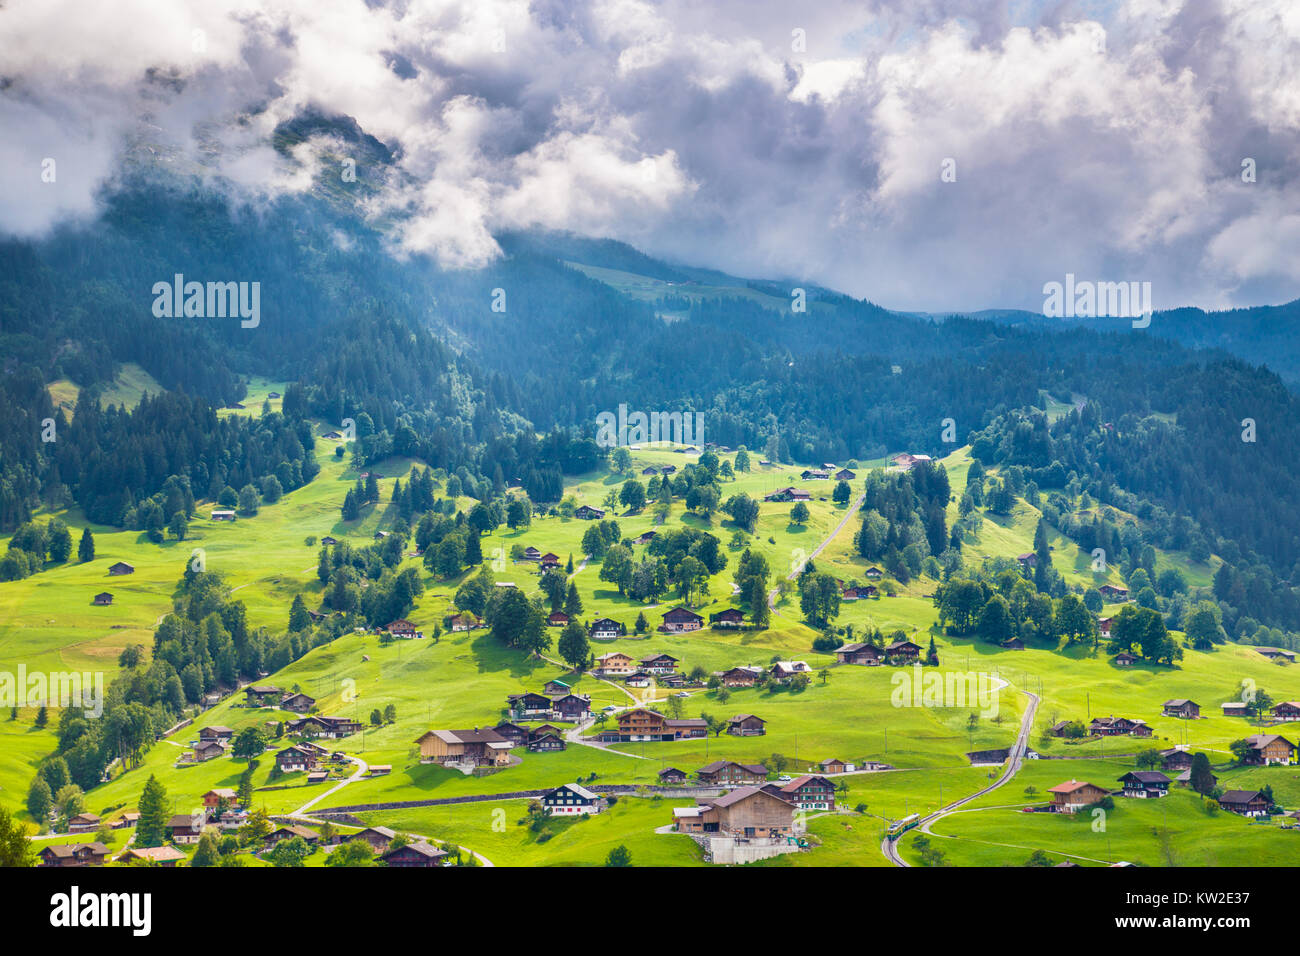 Beautiful view of idyllic mountain scenery in the Alps with old chalets in fresh green meadows, Grindelwald, Bernese Alps, Switzerland Stock Photo